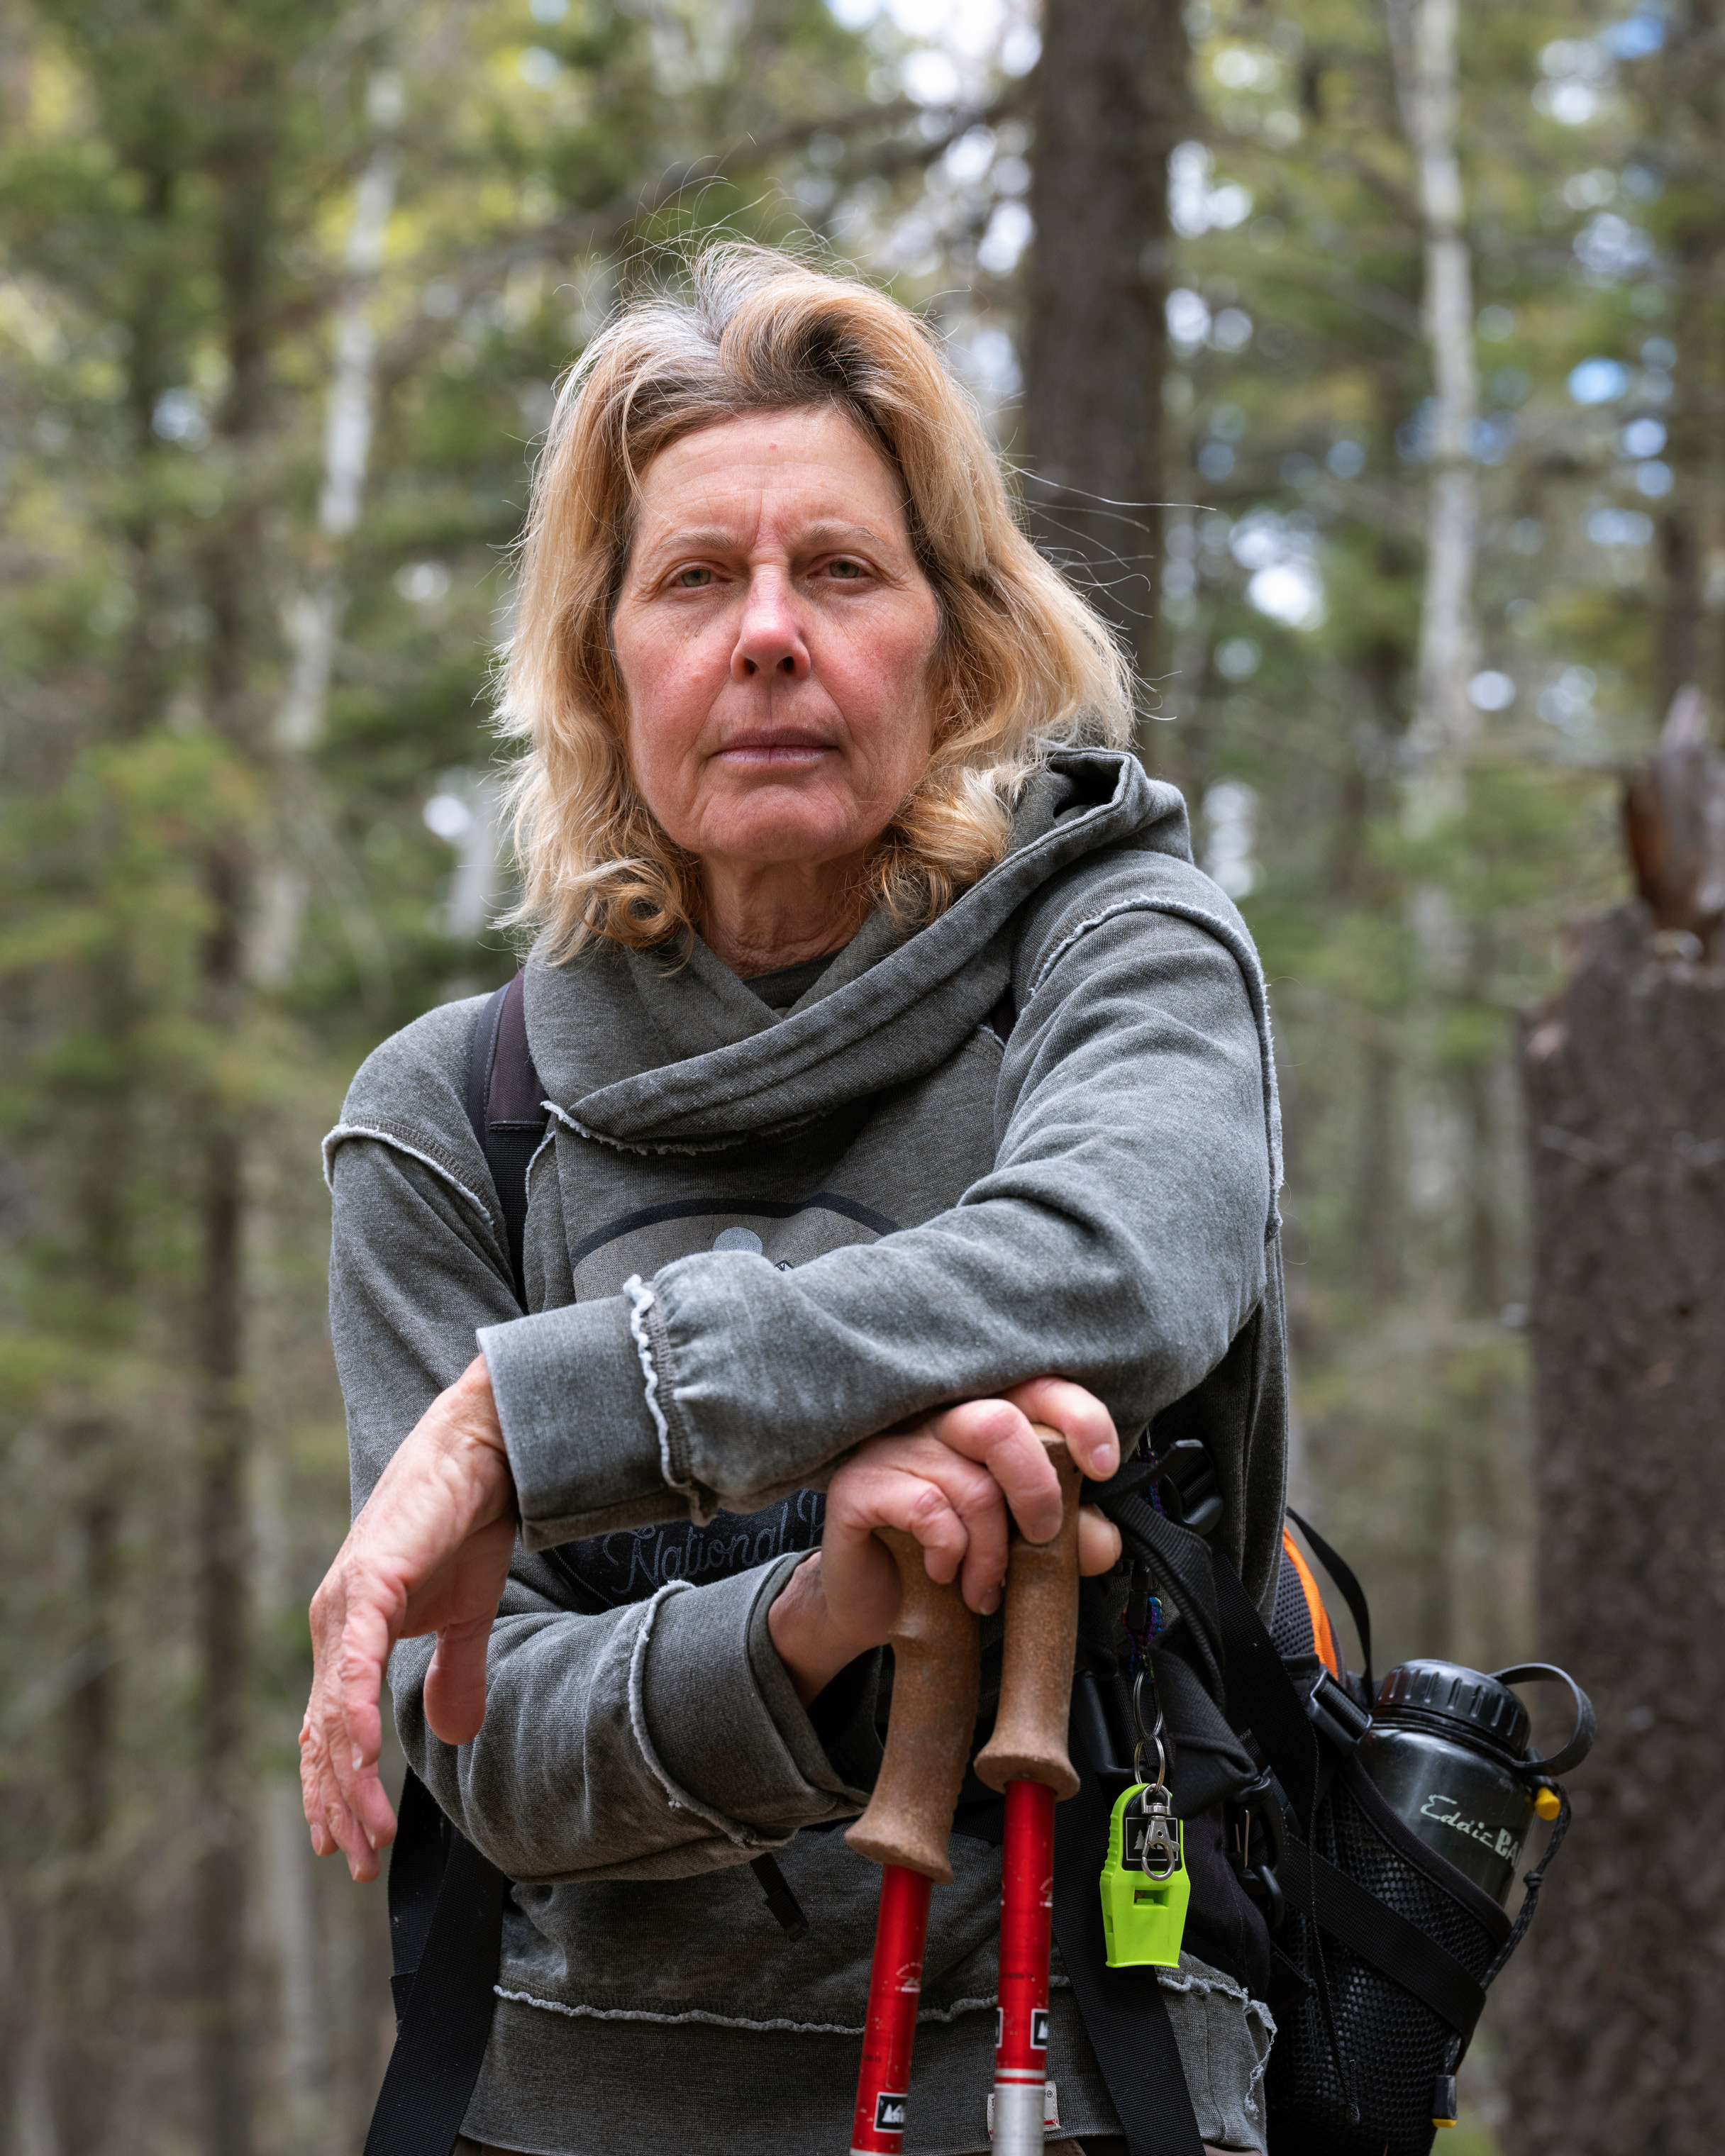 Cynthia Meachum in the Pecos Wilderness, May 28, 2019.